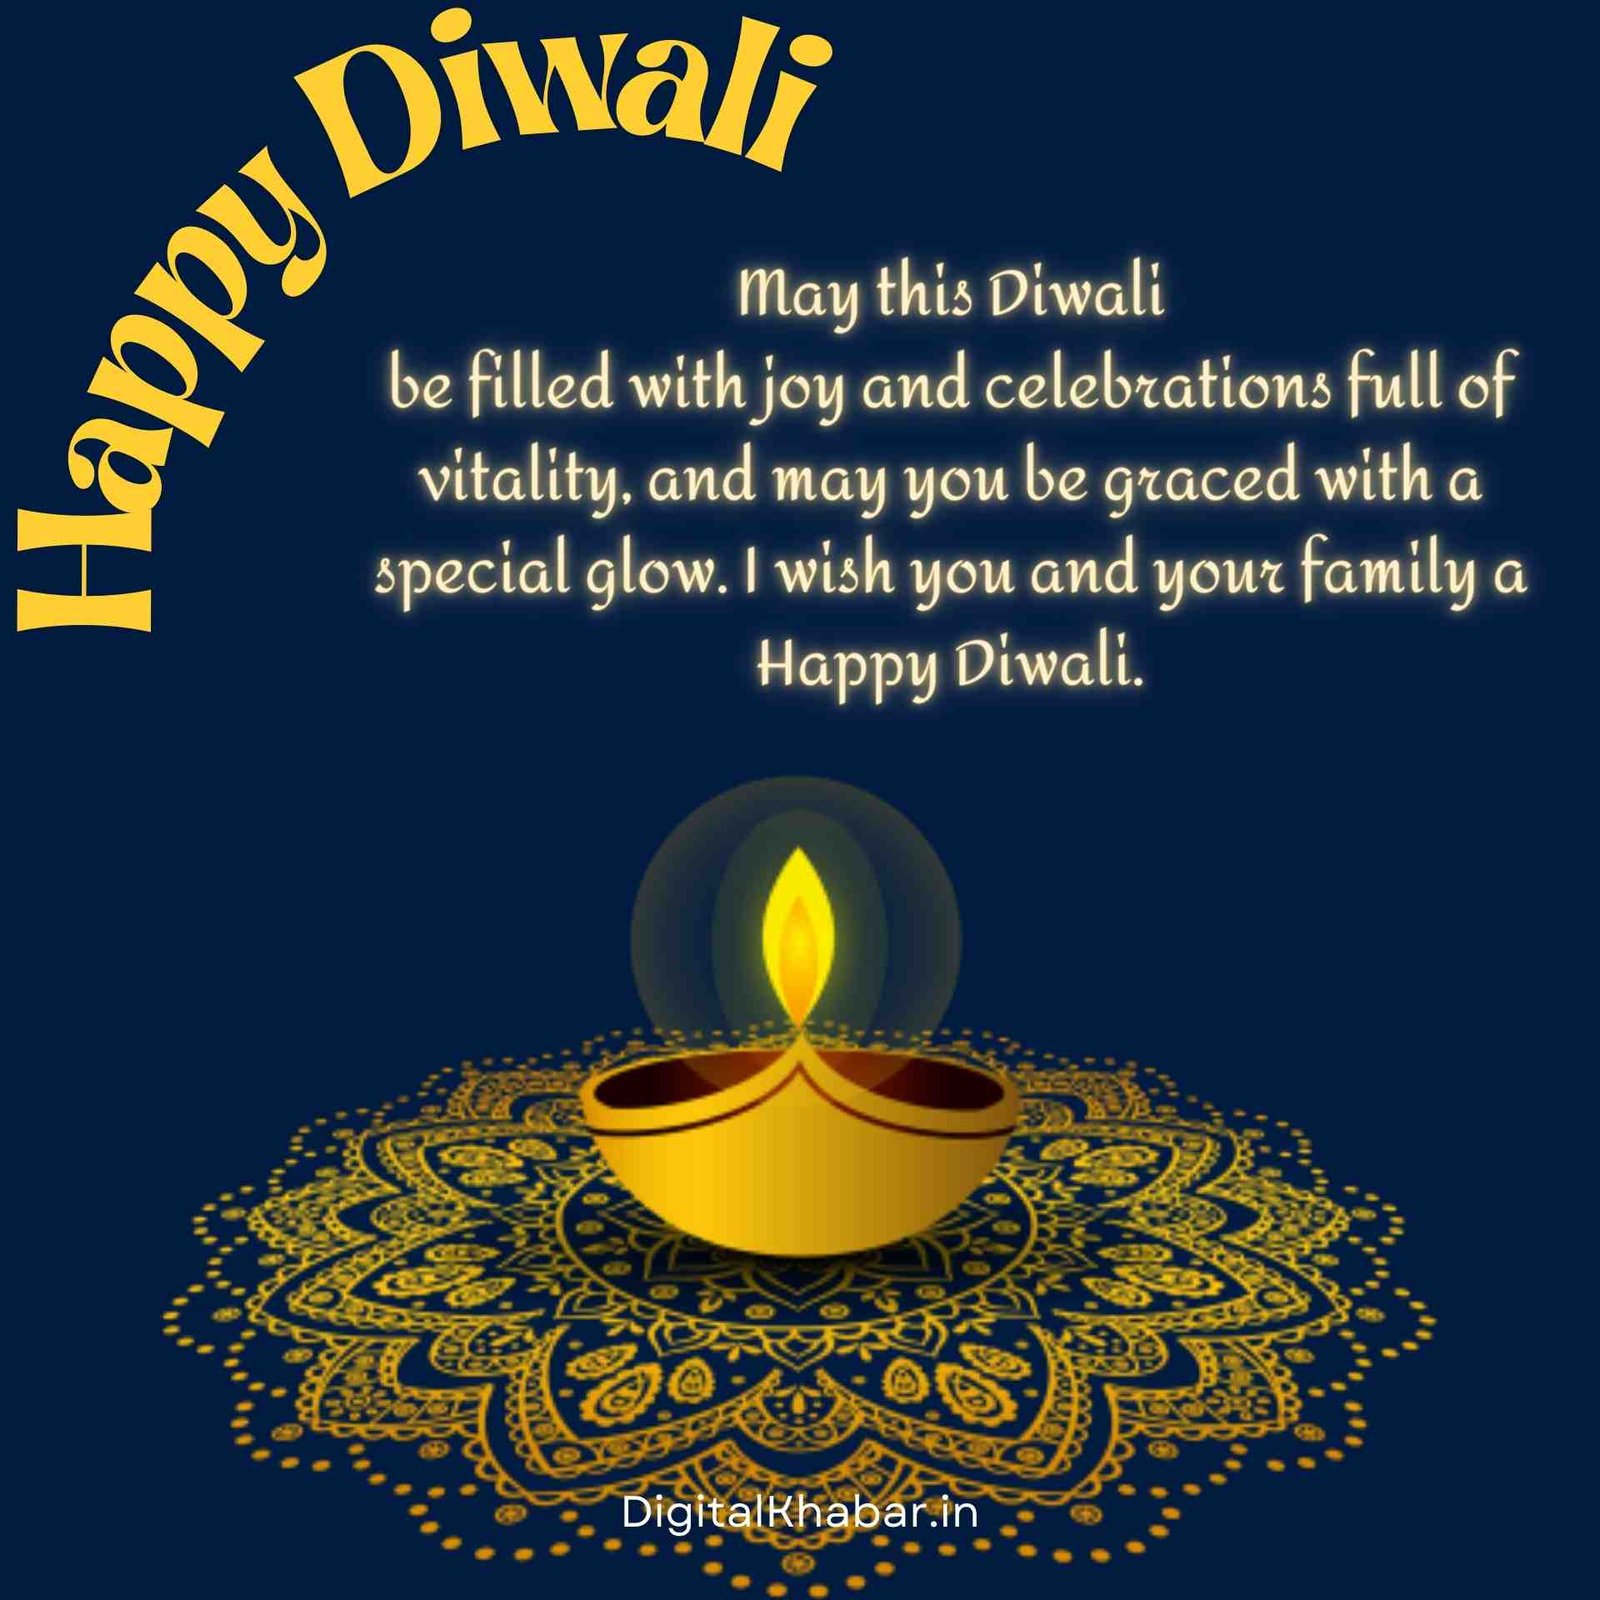 Happy Diwali images for whatsapp